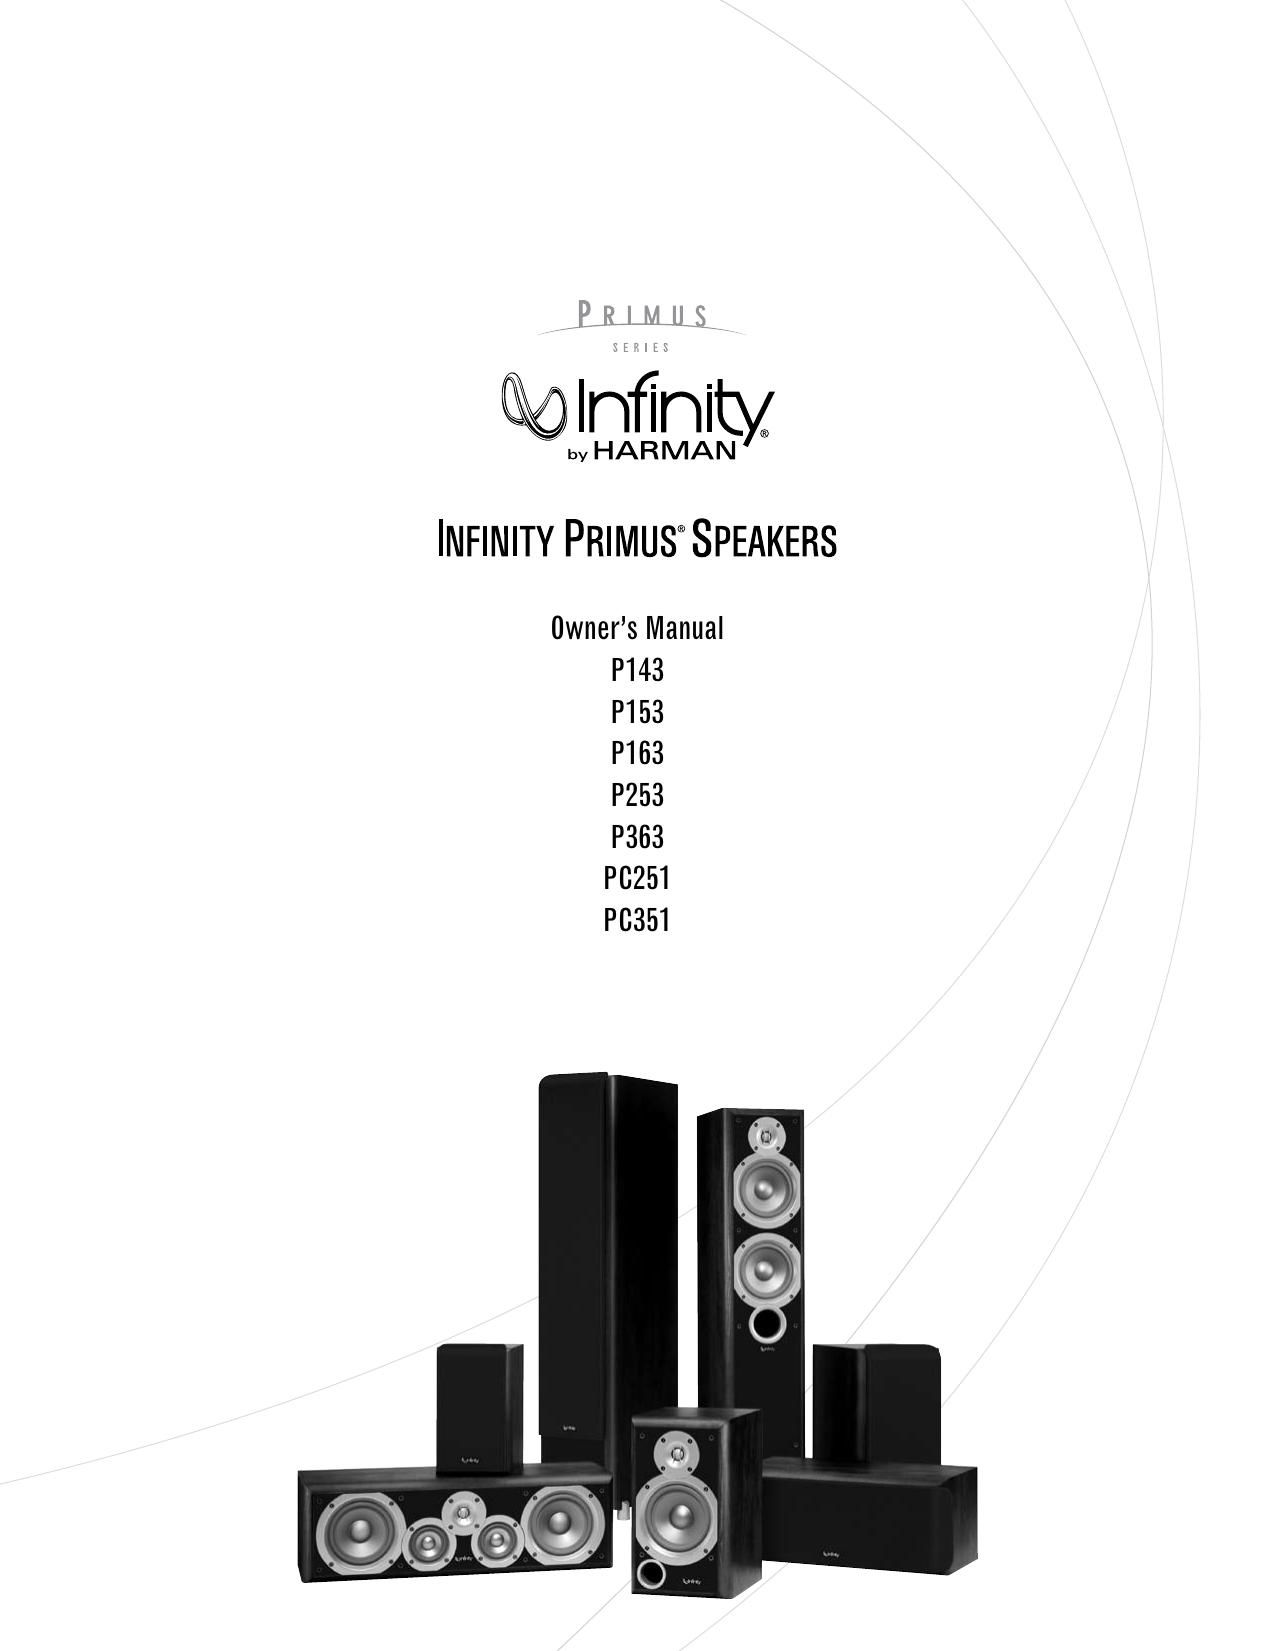 Infinity Primus P 163 Owners Manual